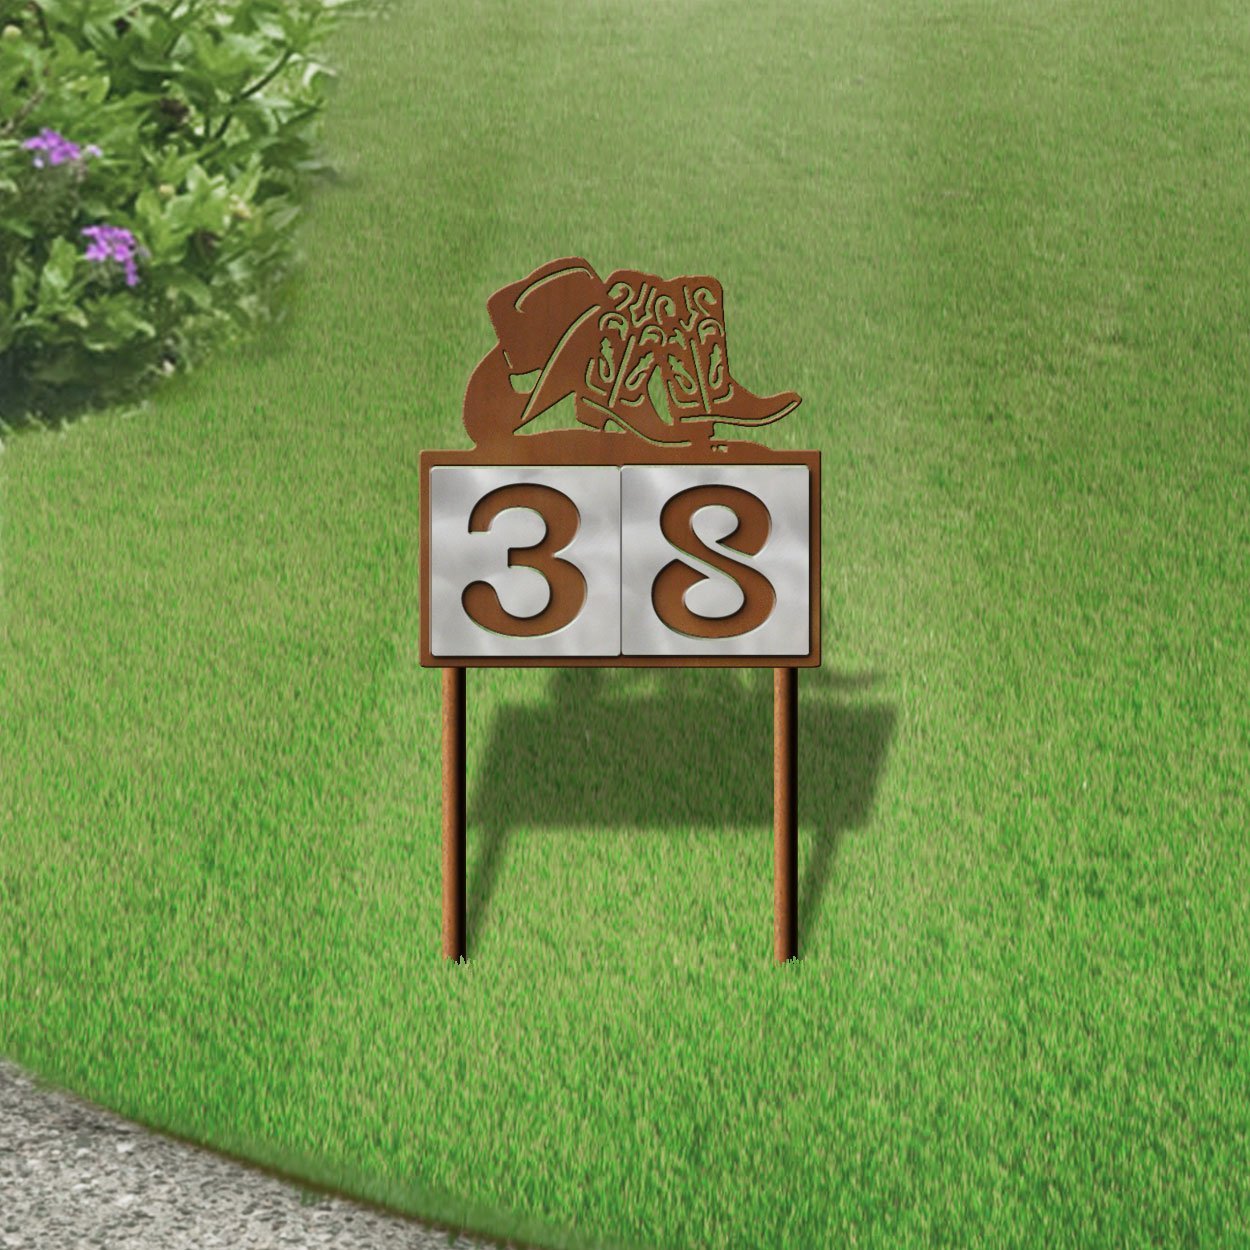 610032 - Cowboy Hat and Boots Design 2-Digit Horizontal 6-inch Tile Outdoor House Numbers Yard Sign